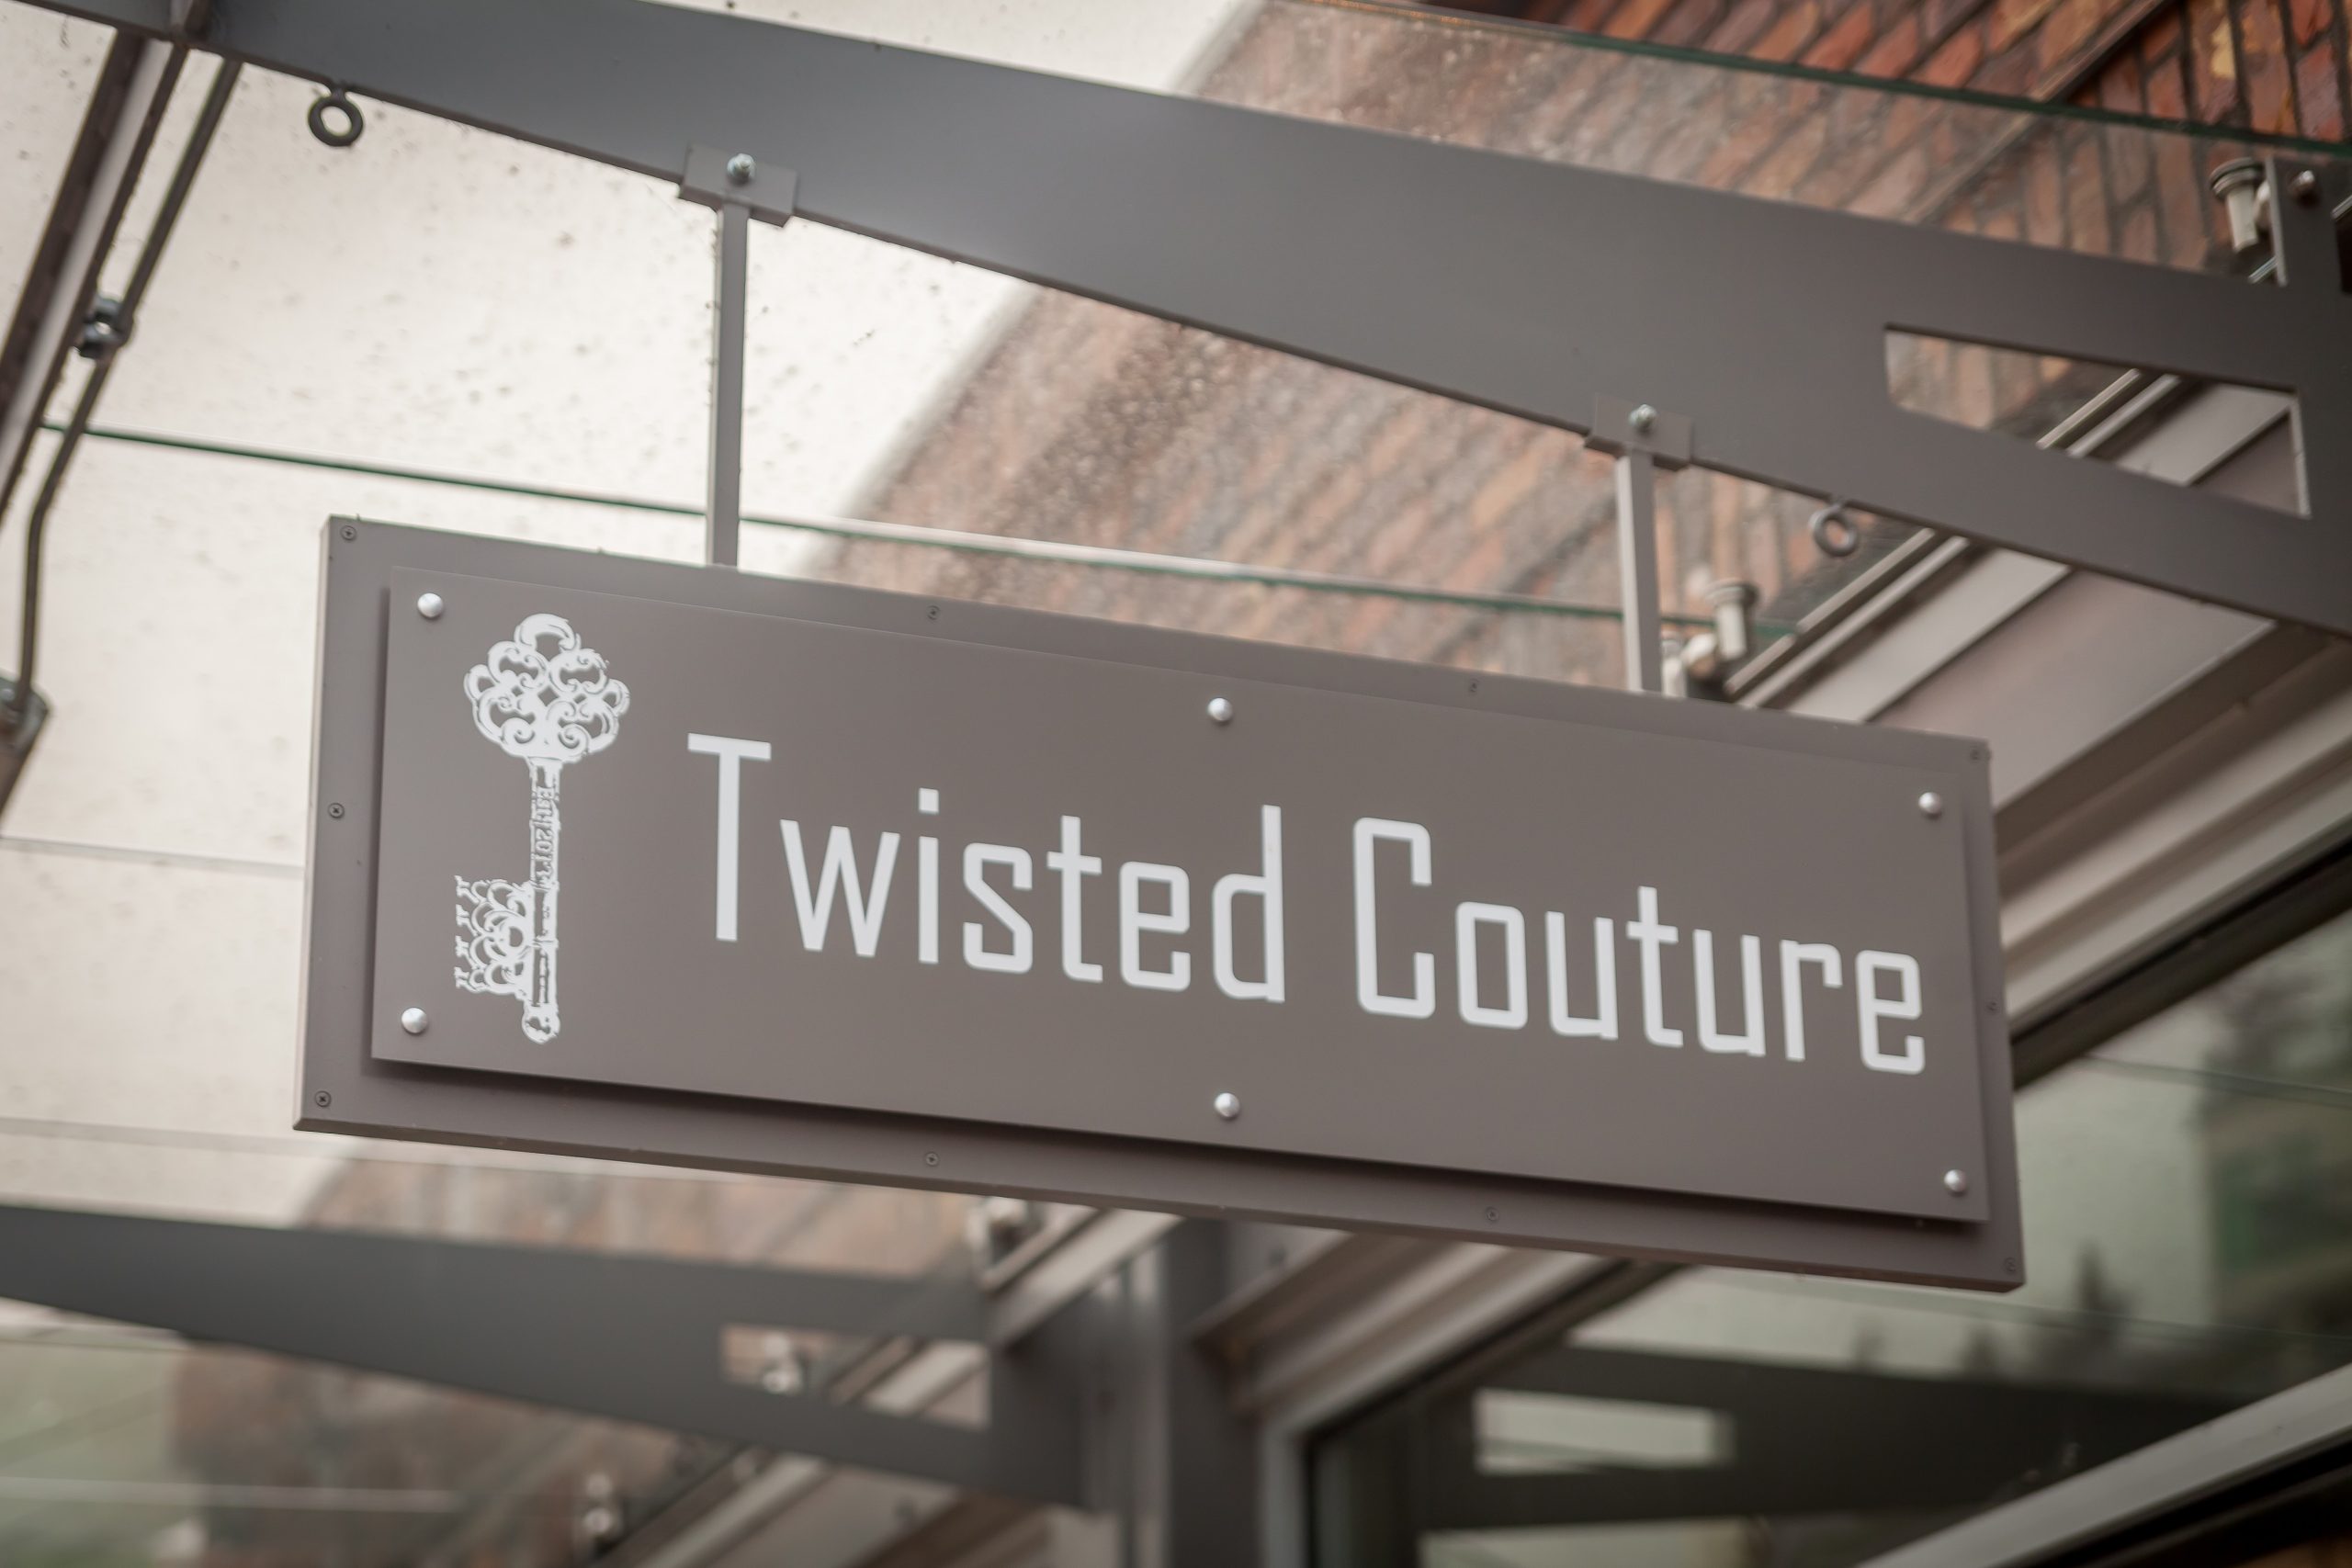 TWISTED COUTURE